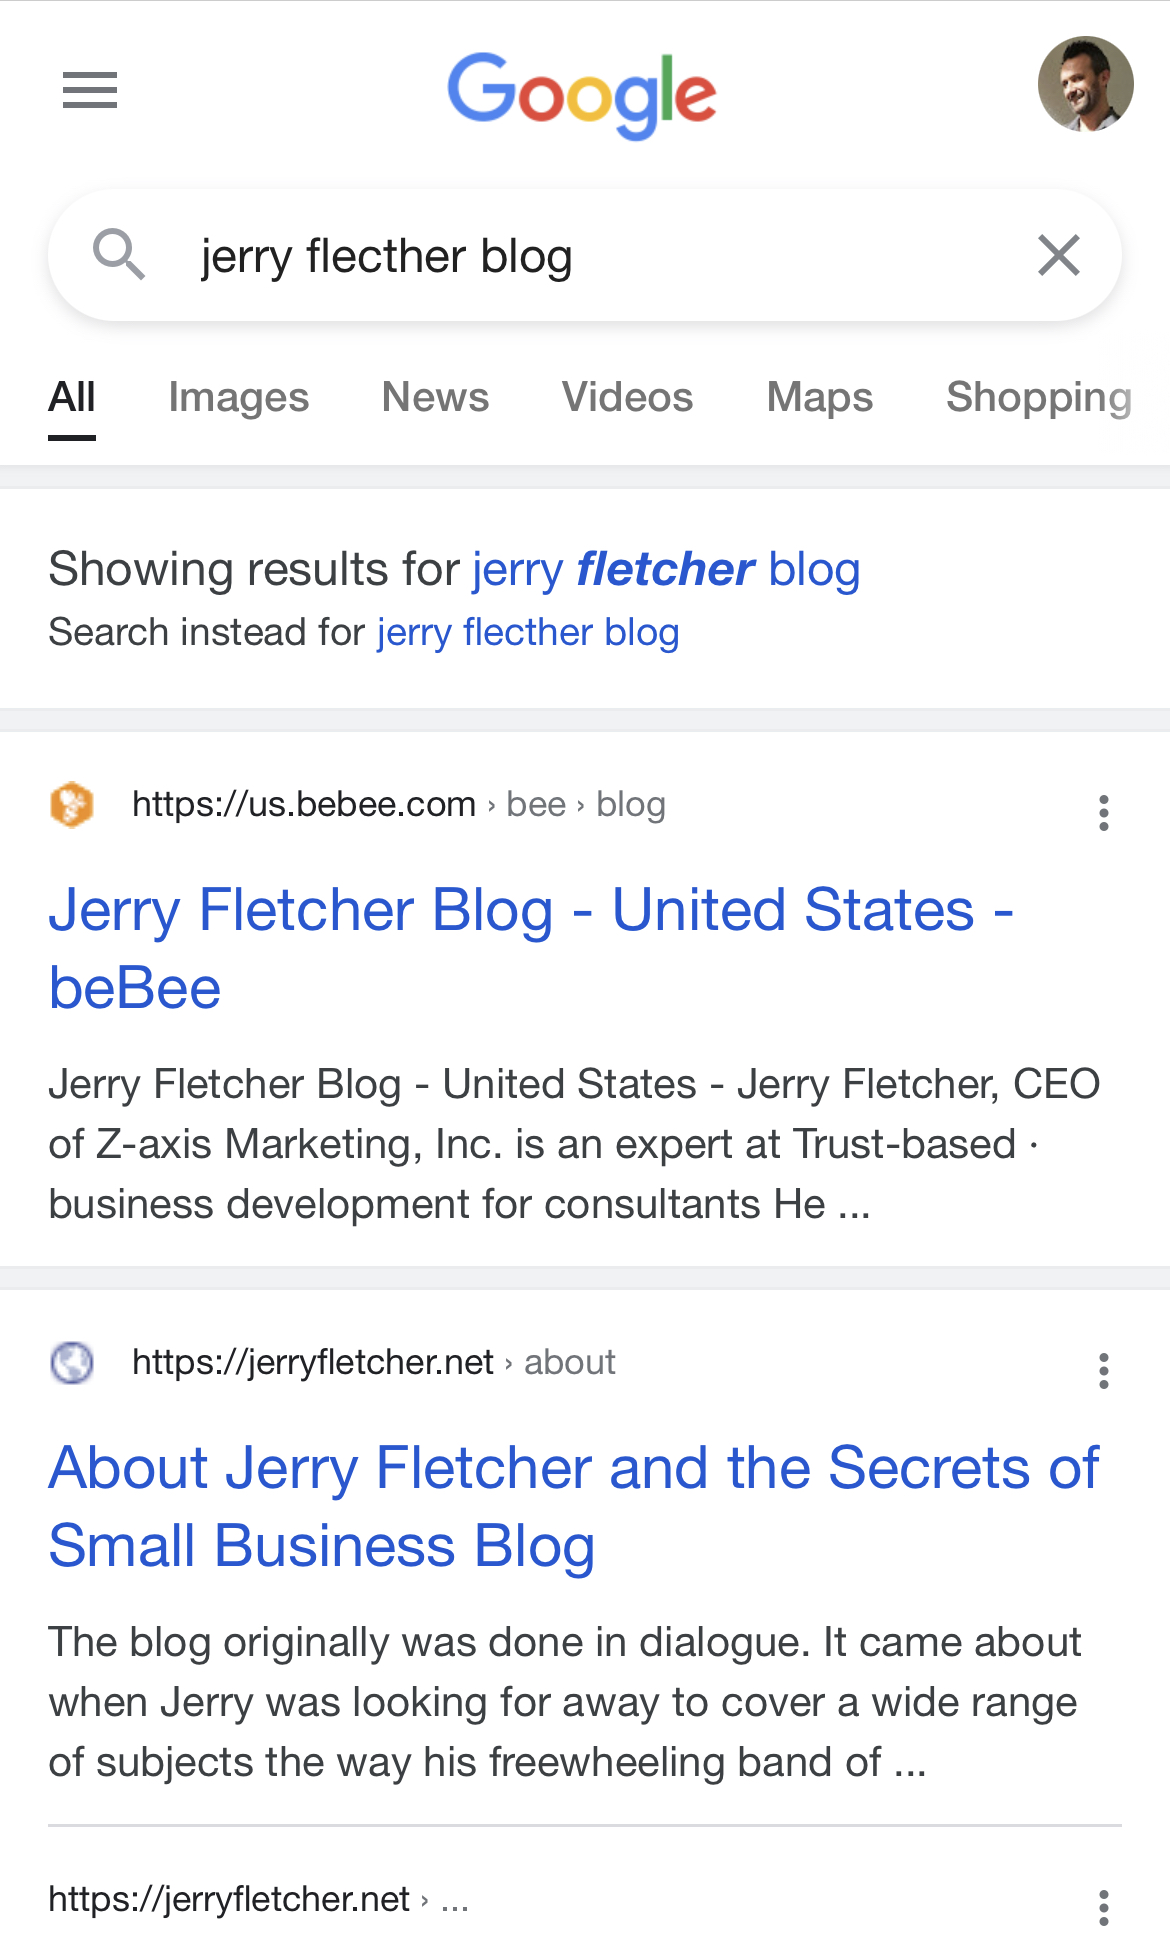 = Go gle 3
Q, jerry flecther blog X

All Images News Videos Maps Shopping

Showing results for jerry fletcher blog
Search instead for jerry flecther blog

LJ) https://us.bebee.com > bee > blog

Jerry Fletcher Blog - United States -
beBee

Jerry Fletcher Blog - United States - Jerry Fletcher, CEO
of Z-axis Marketing, Inc. is an expert at Trust-based -
business development for consultants He ...

® https://jerryfletcher.net > about
About Jerry Fletcher and the Secrets of
Small Business Blog

The blog originally was done in dialogue. It came about
when Jerry was looking for away to cover a wide range
of subjects the way his freewheeling band of ...

https://jerryfletcher.net > ...